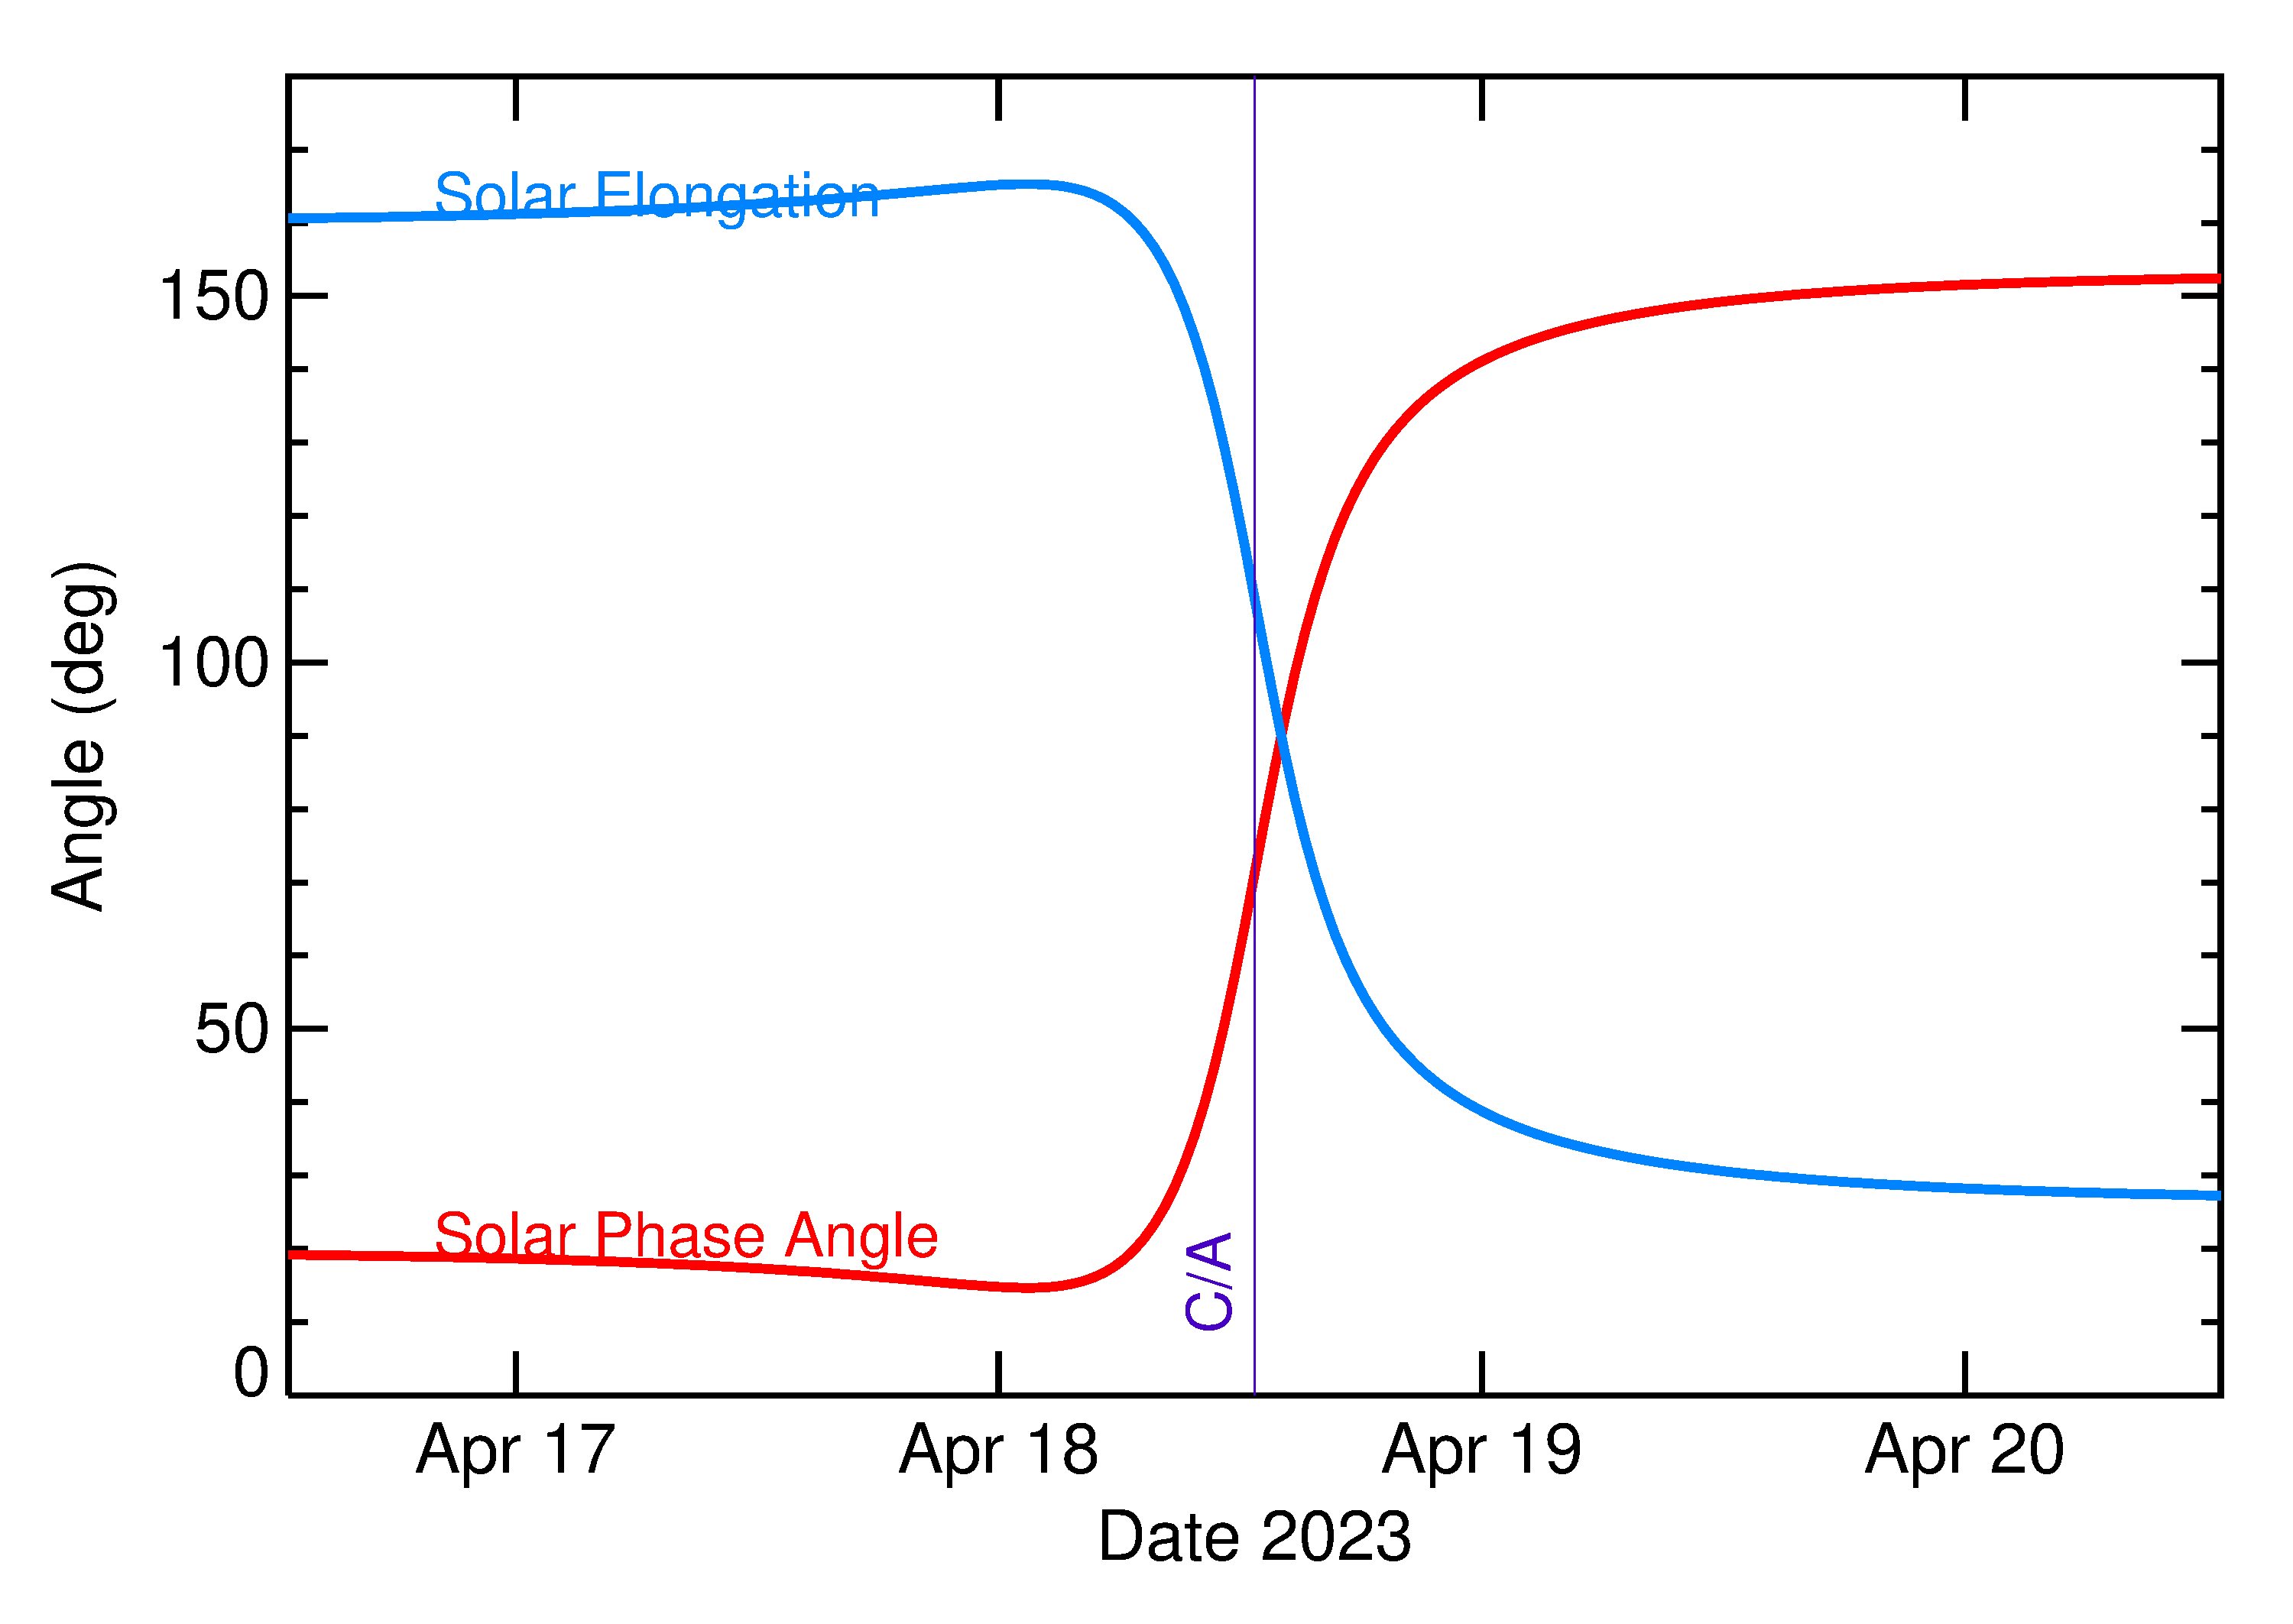 Solar Elongation and Solar Phase Angle of 2023 HH in the days around closest approach